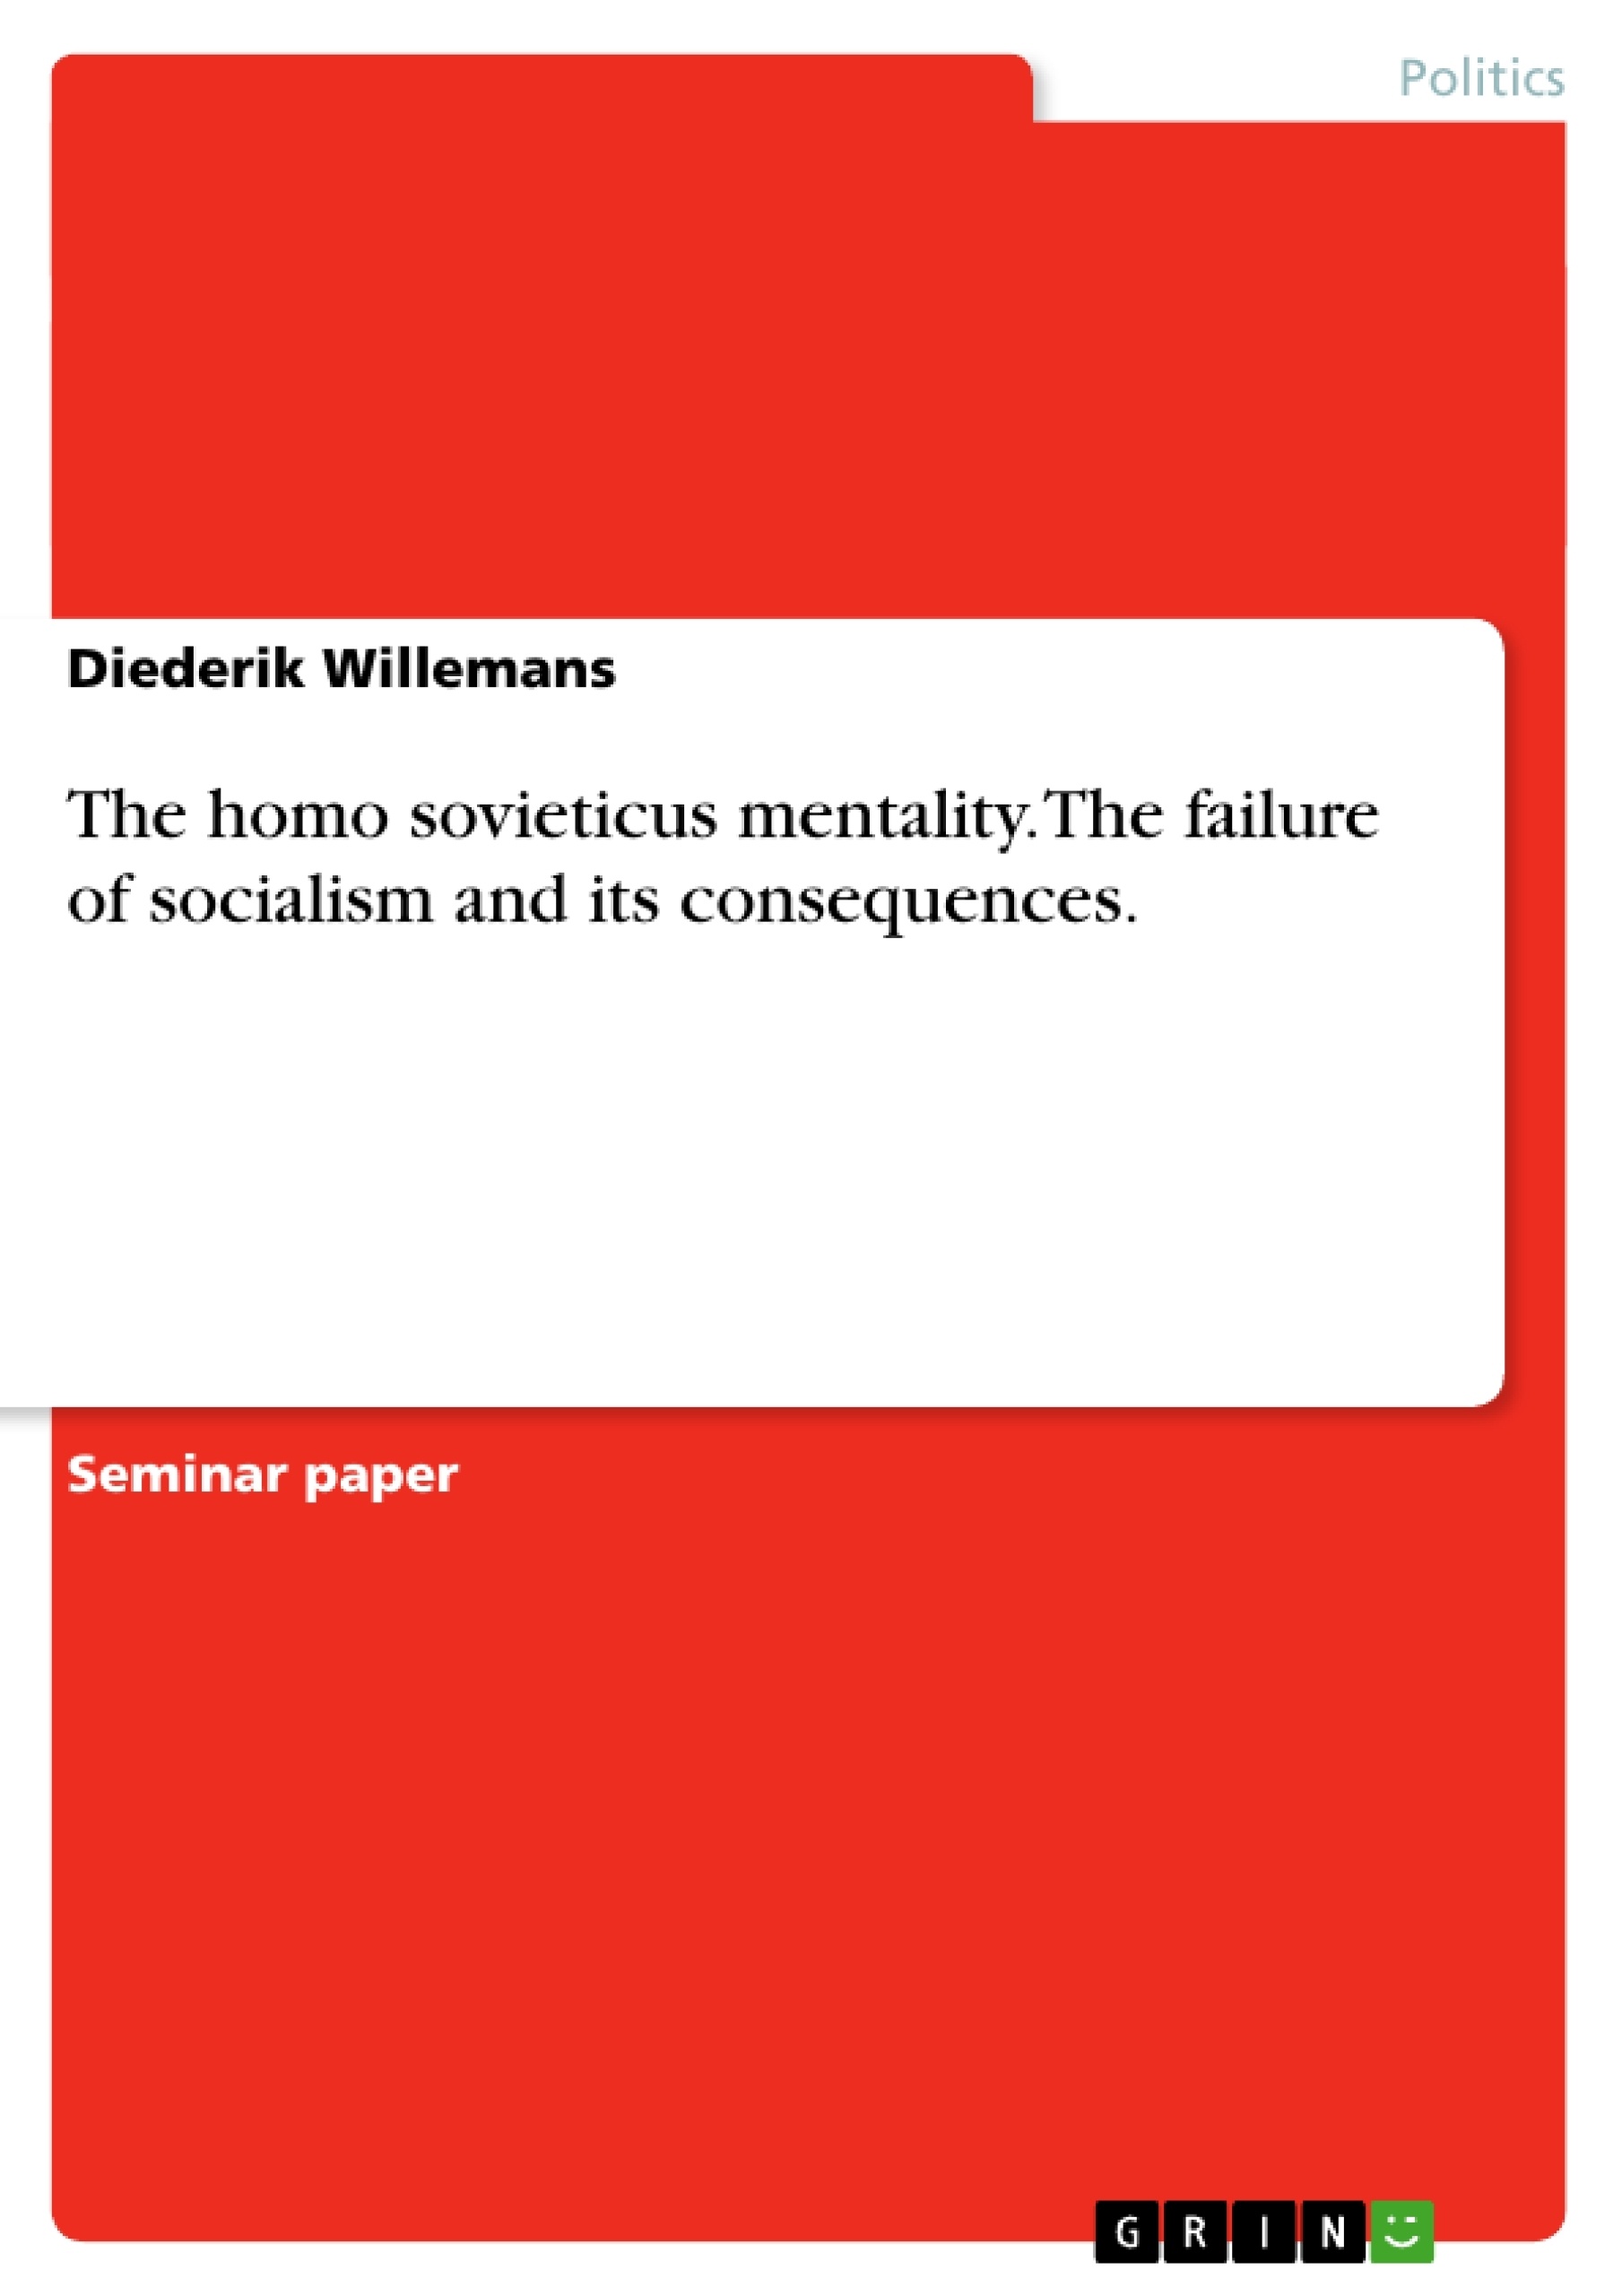 Titre: The homo sovieticus mentality. The failure of socialism and its consequences.